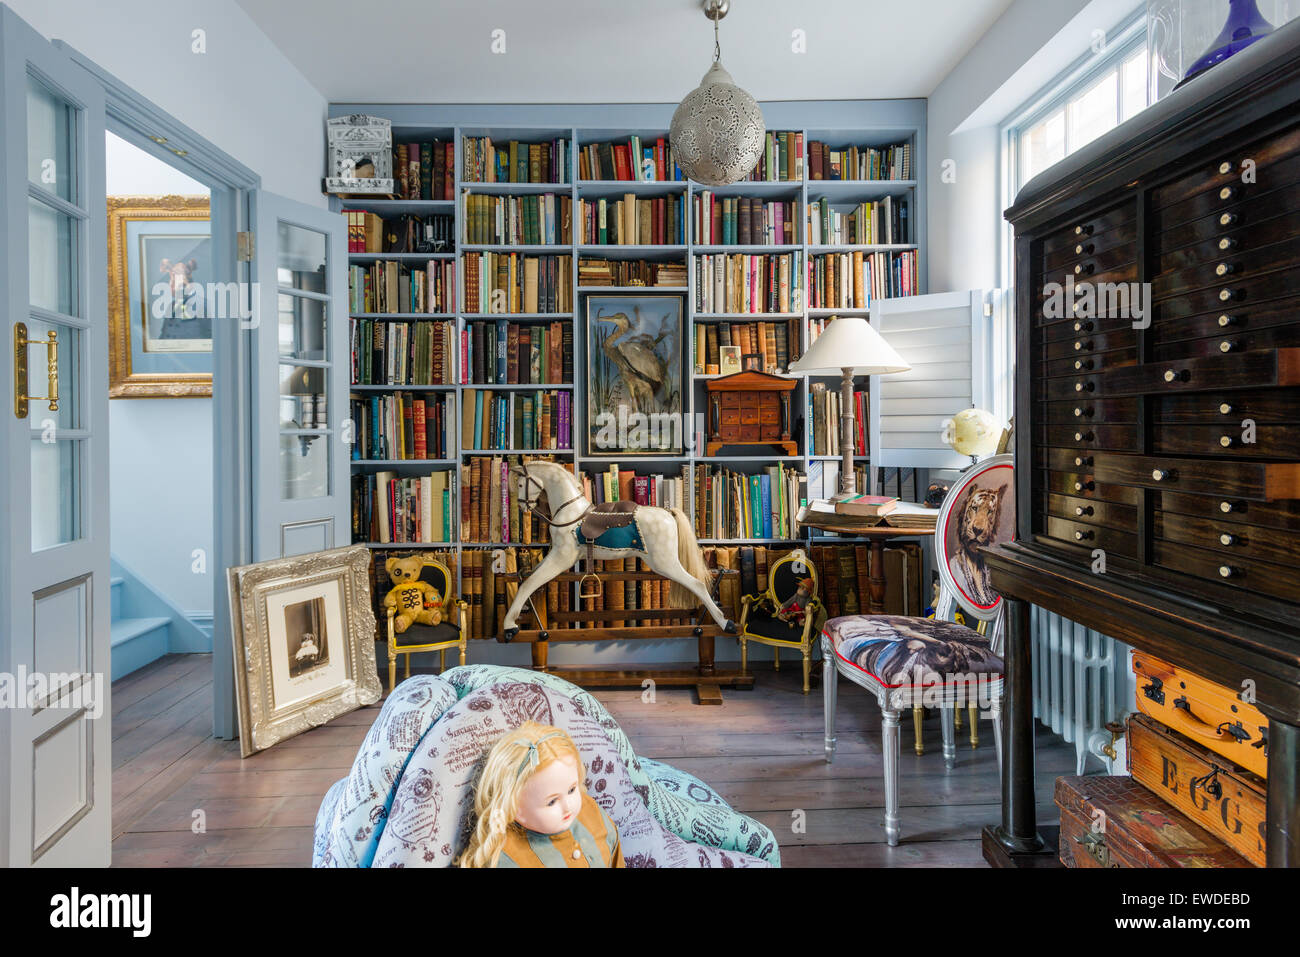 Blue painted shelves in library with antique rocking horse and Cory Visitorian upholstered chair Stock Photo